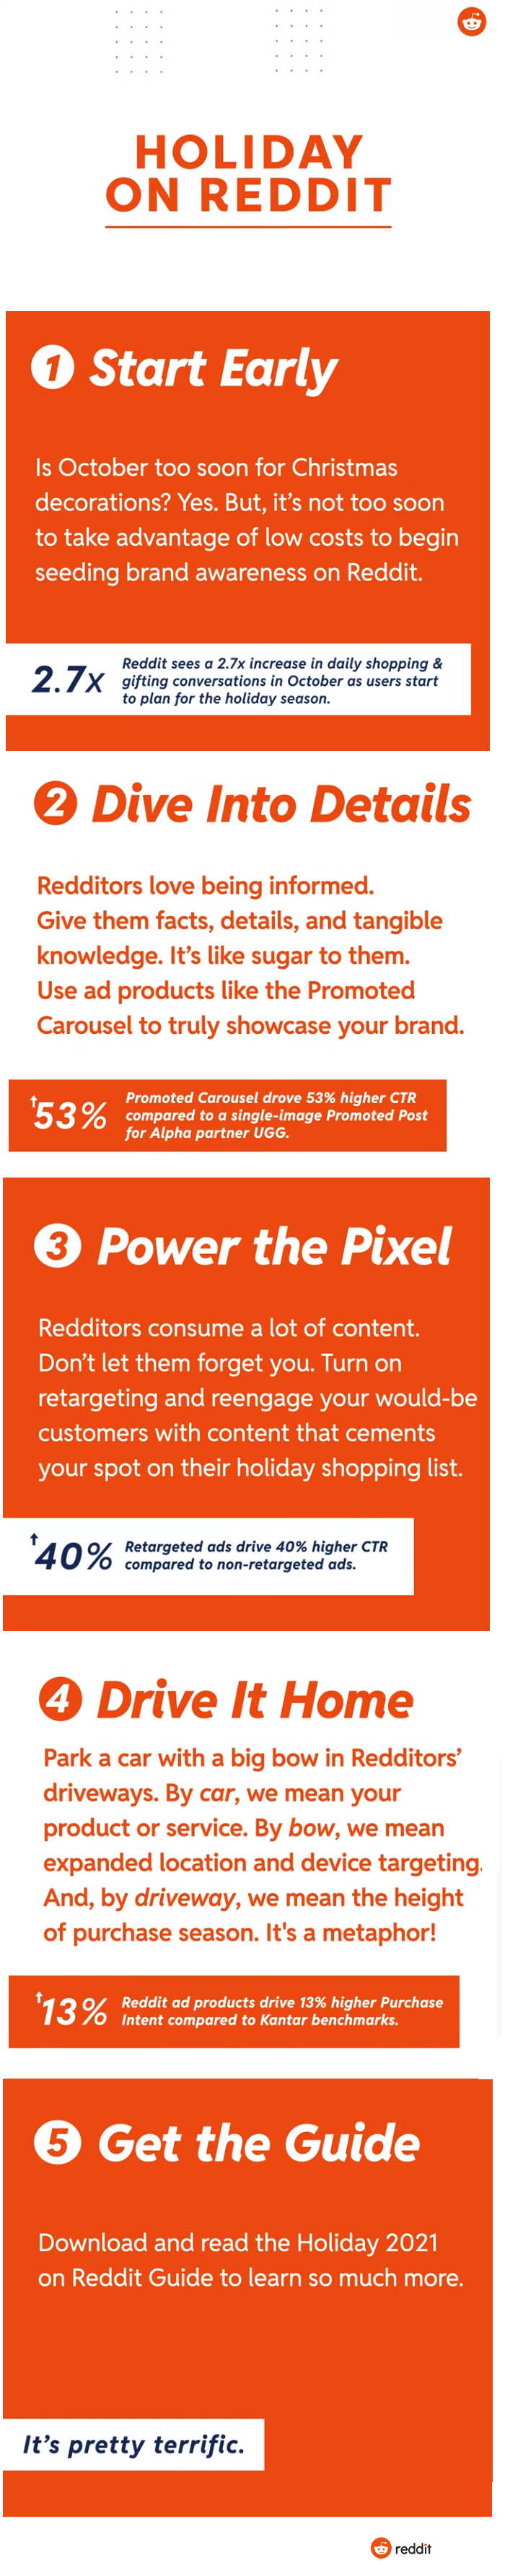 reddit provides tips for your upcoming holiday marketing campaigns infographic